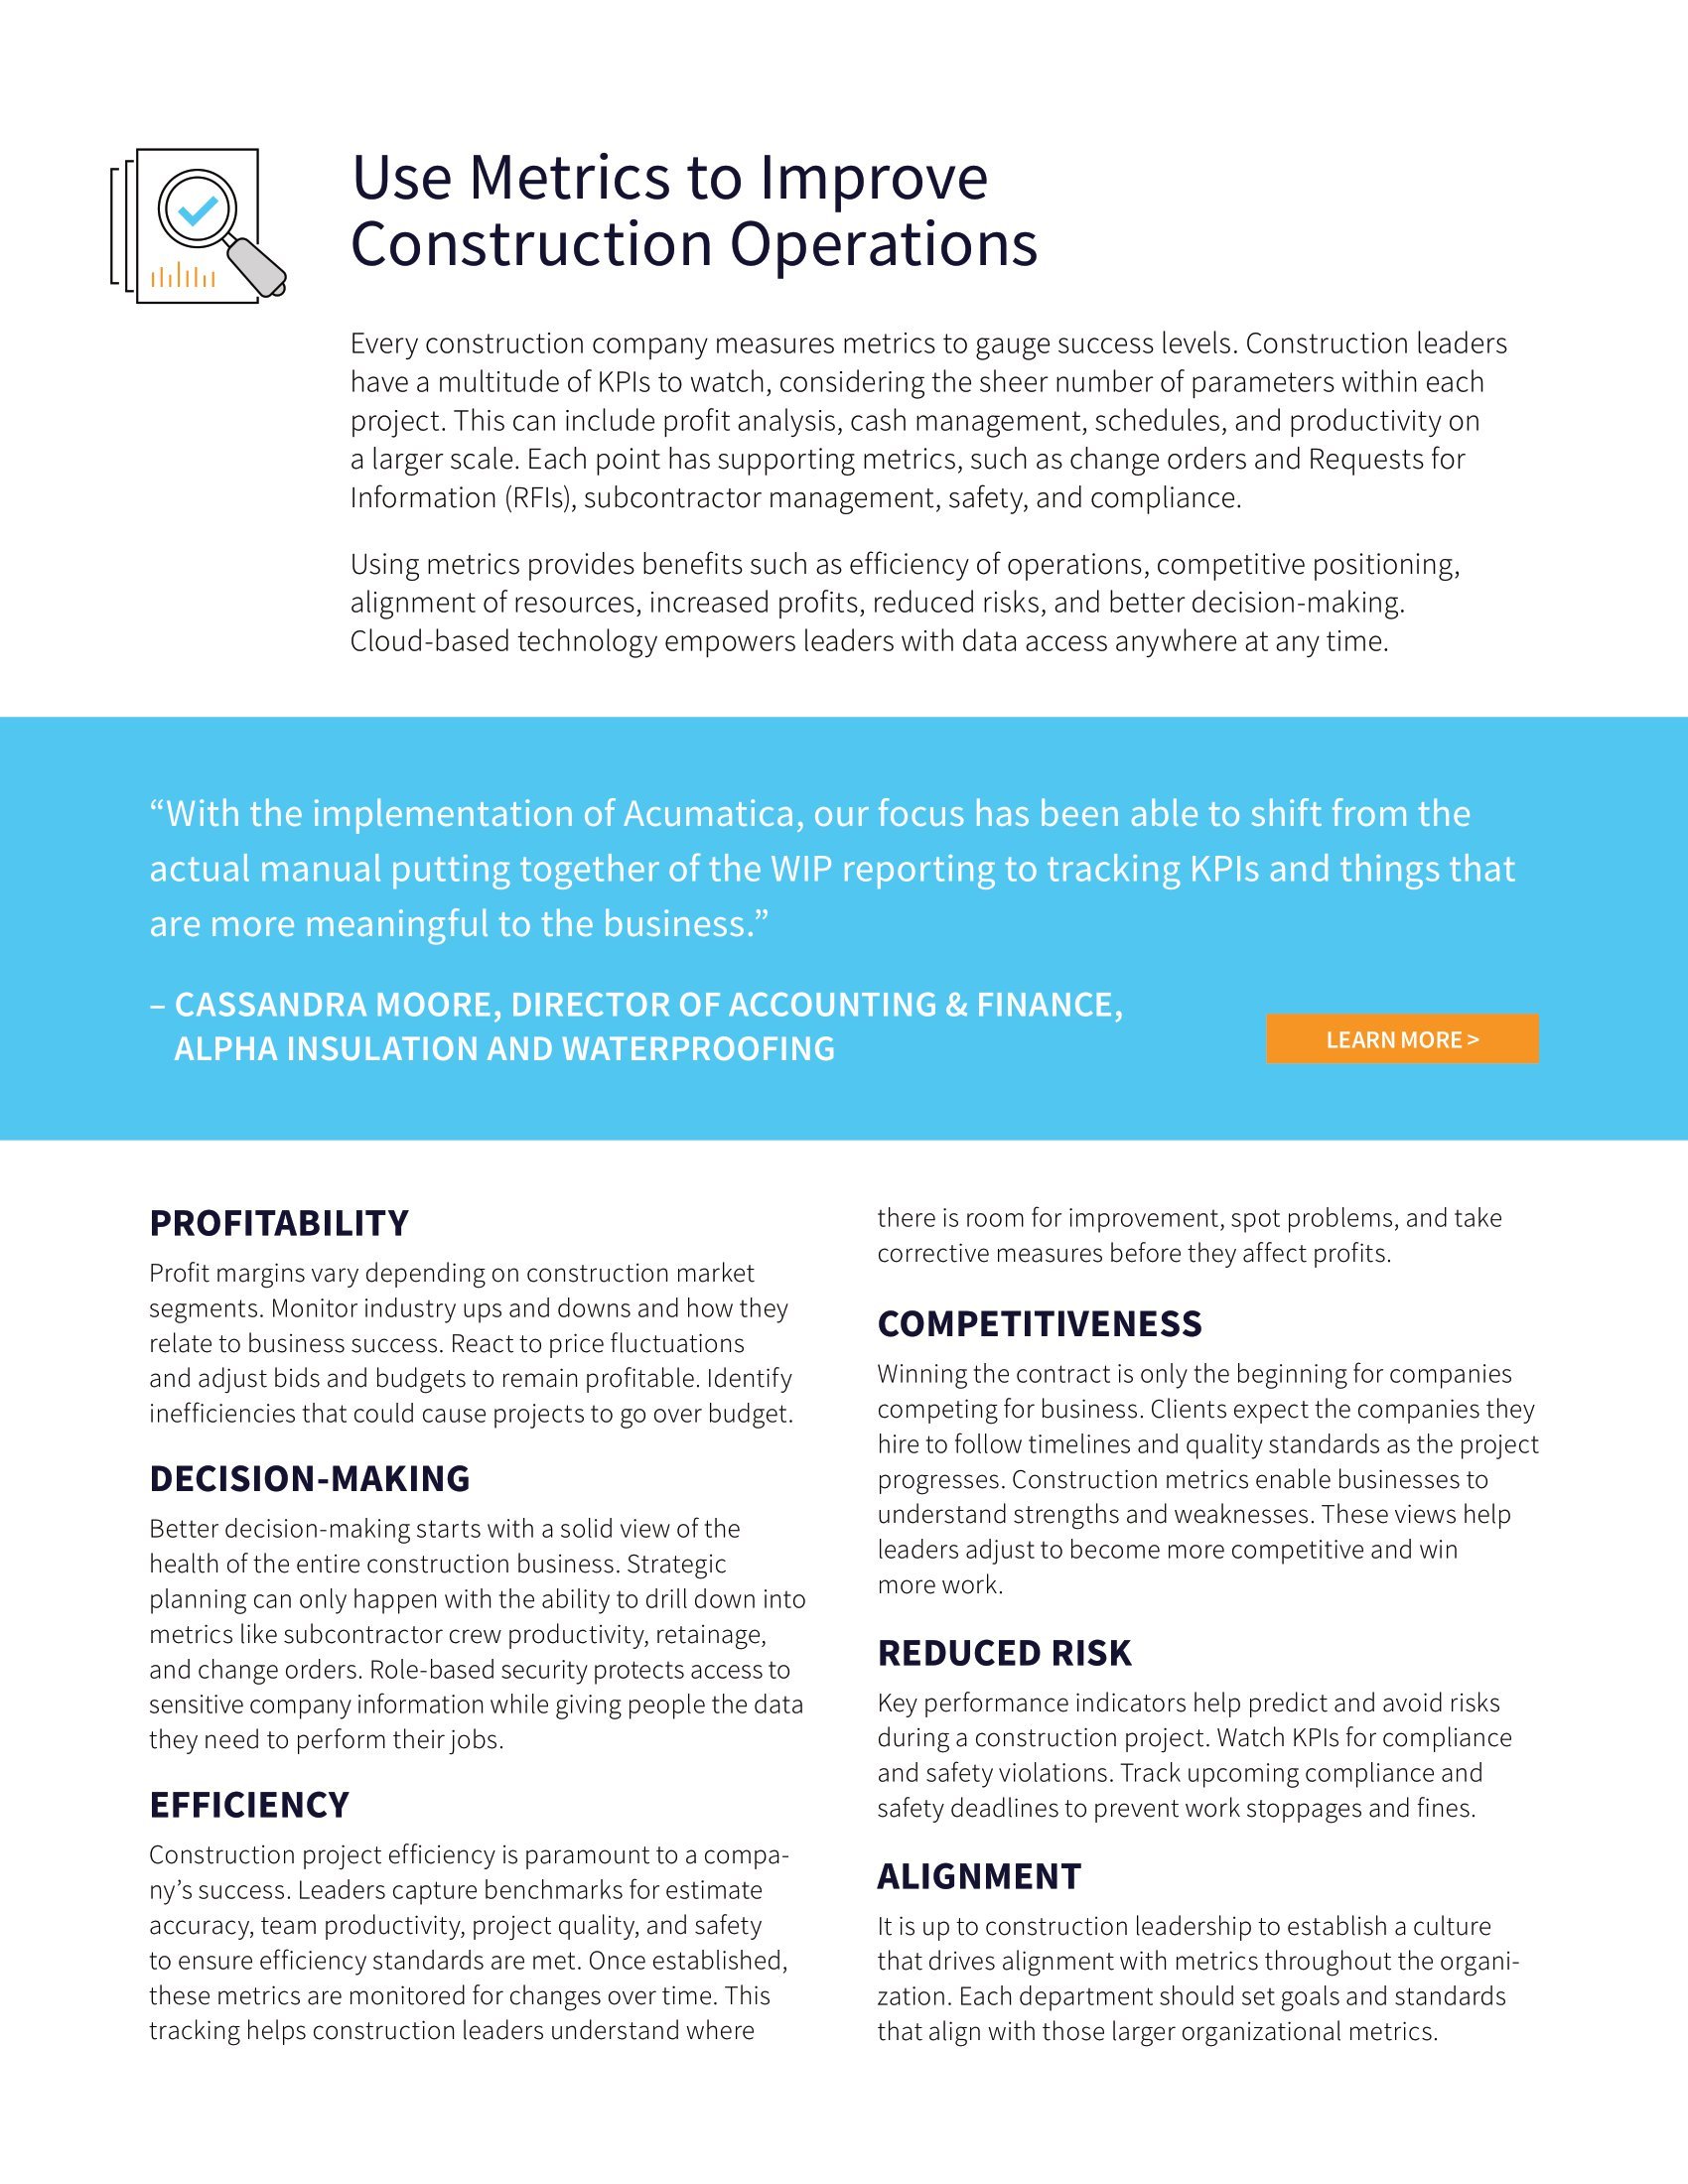 Measurable Growth Begins with Measuring the Right Construction Metrics, page 1